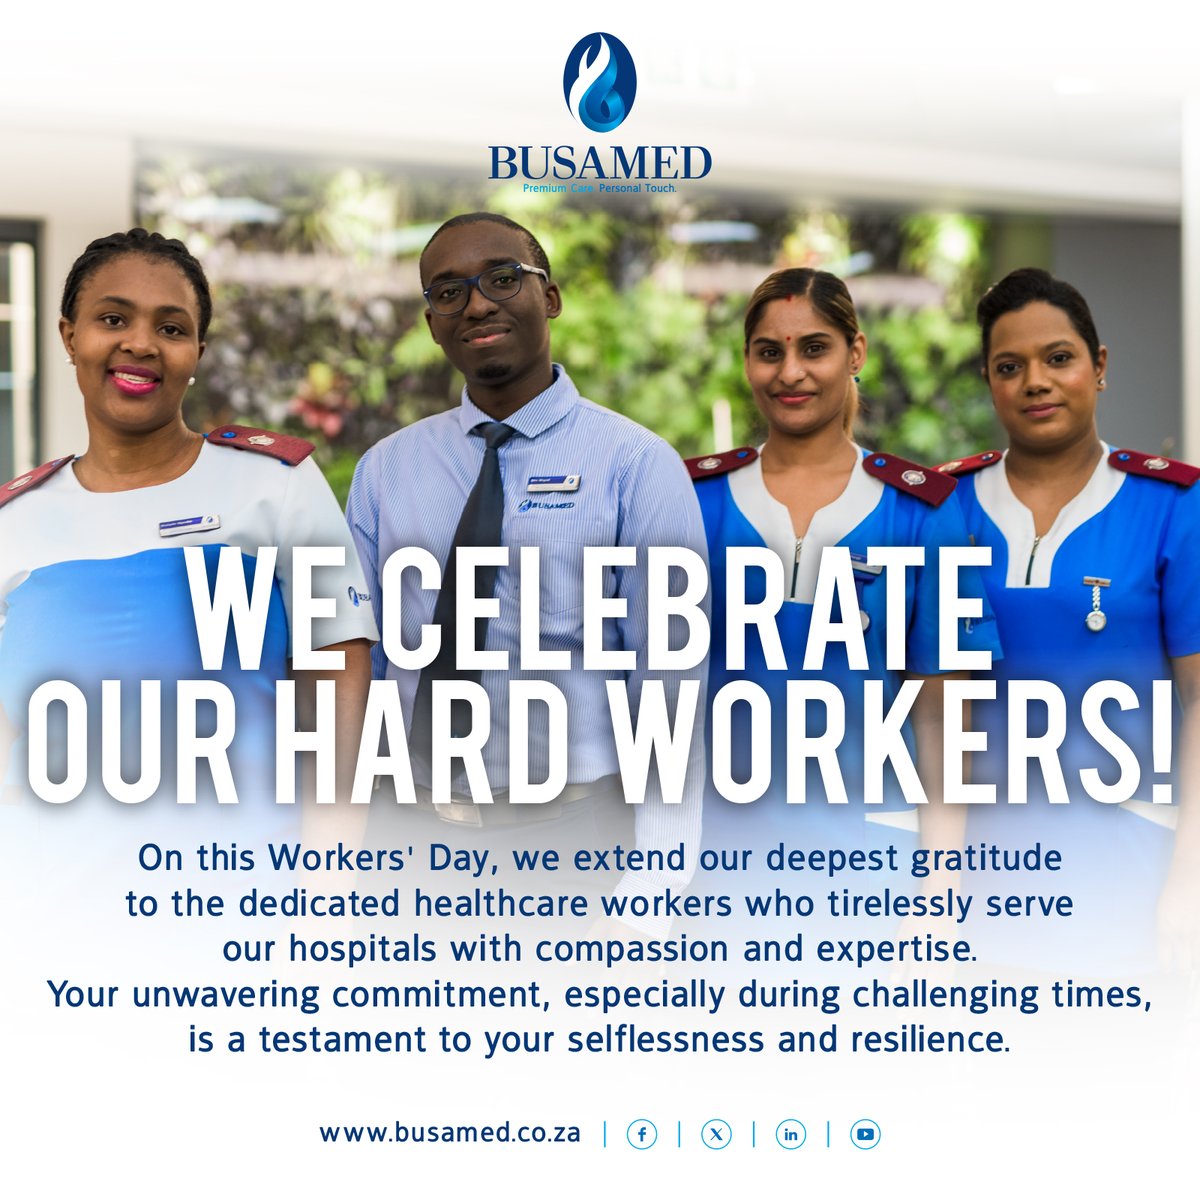 Today, we honour and celebrate you, the heroes of our healthcare system, for your invaluable contributions to the well-being of society. Thank you for your tireless efforts and sacrifices. Happy Workers' Day! #Busamed #HappyWorkersDay